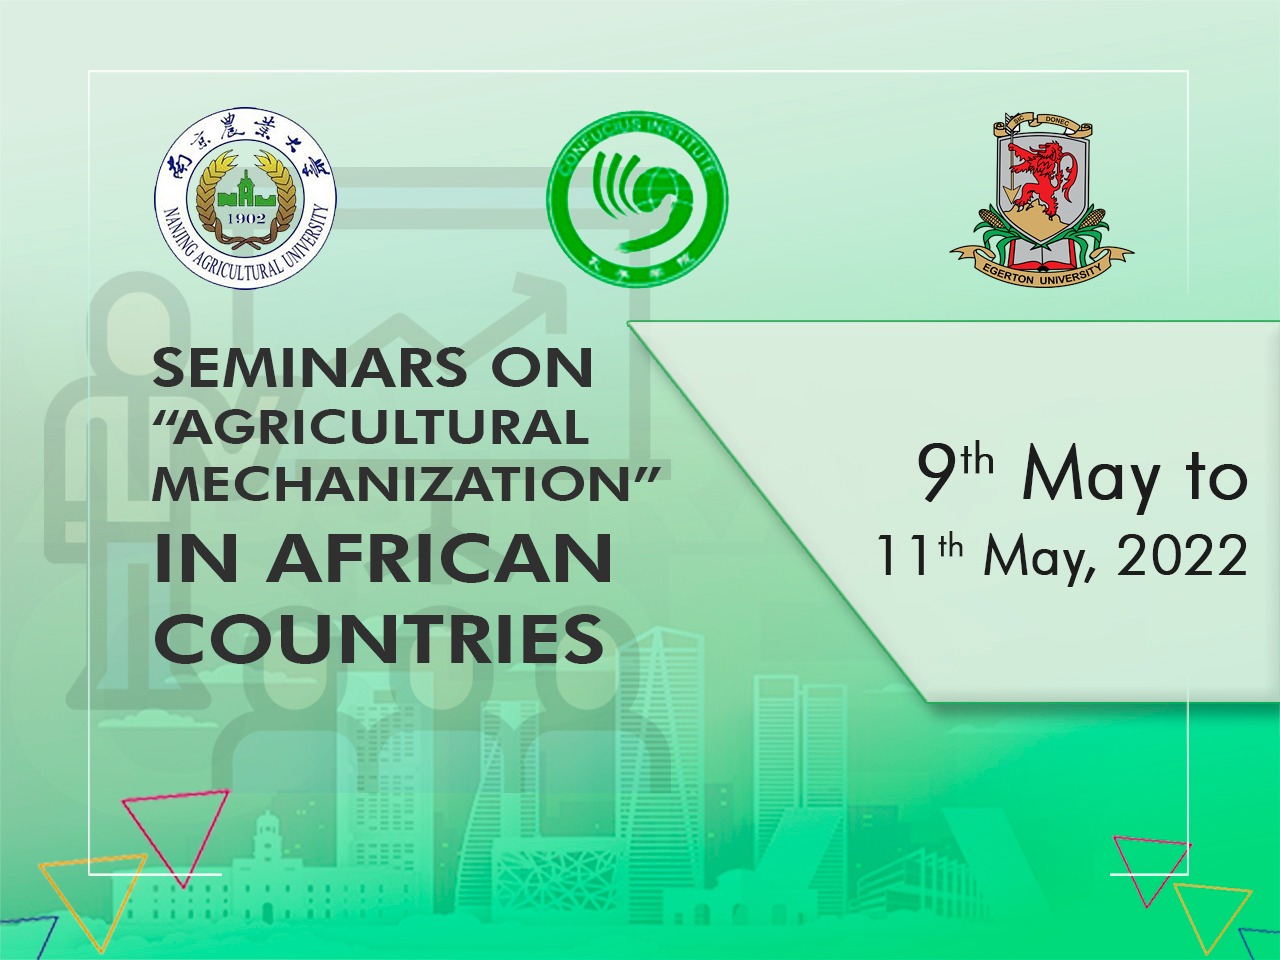 Seminars on “Agricultural Mechanization” in African Countries